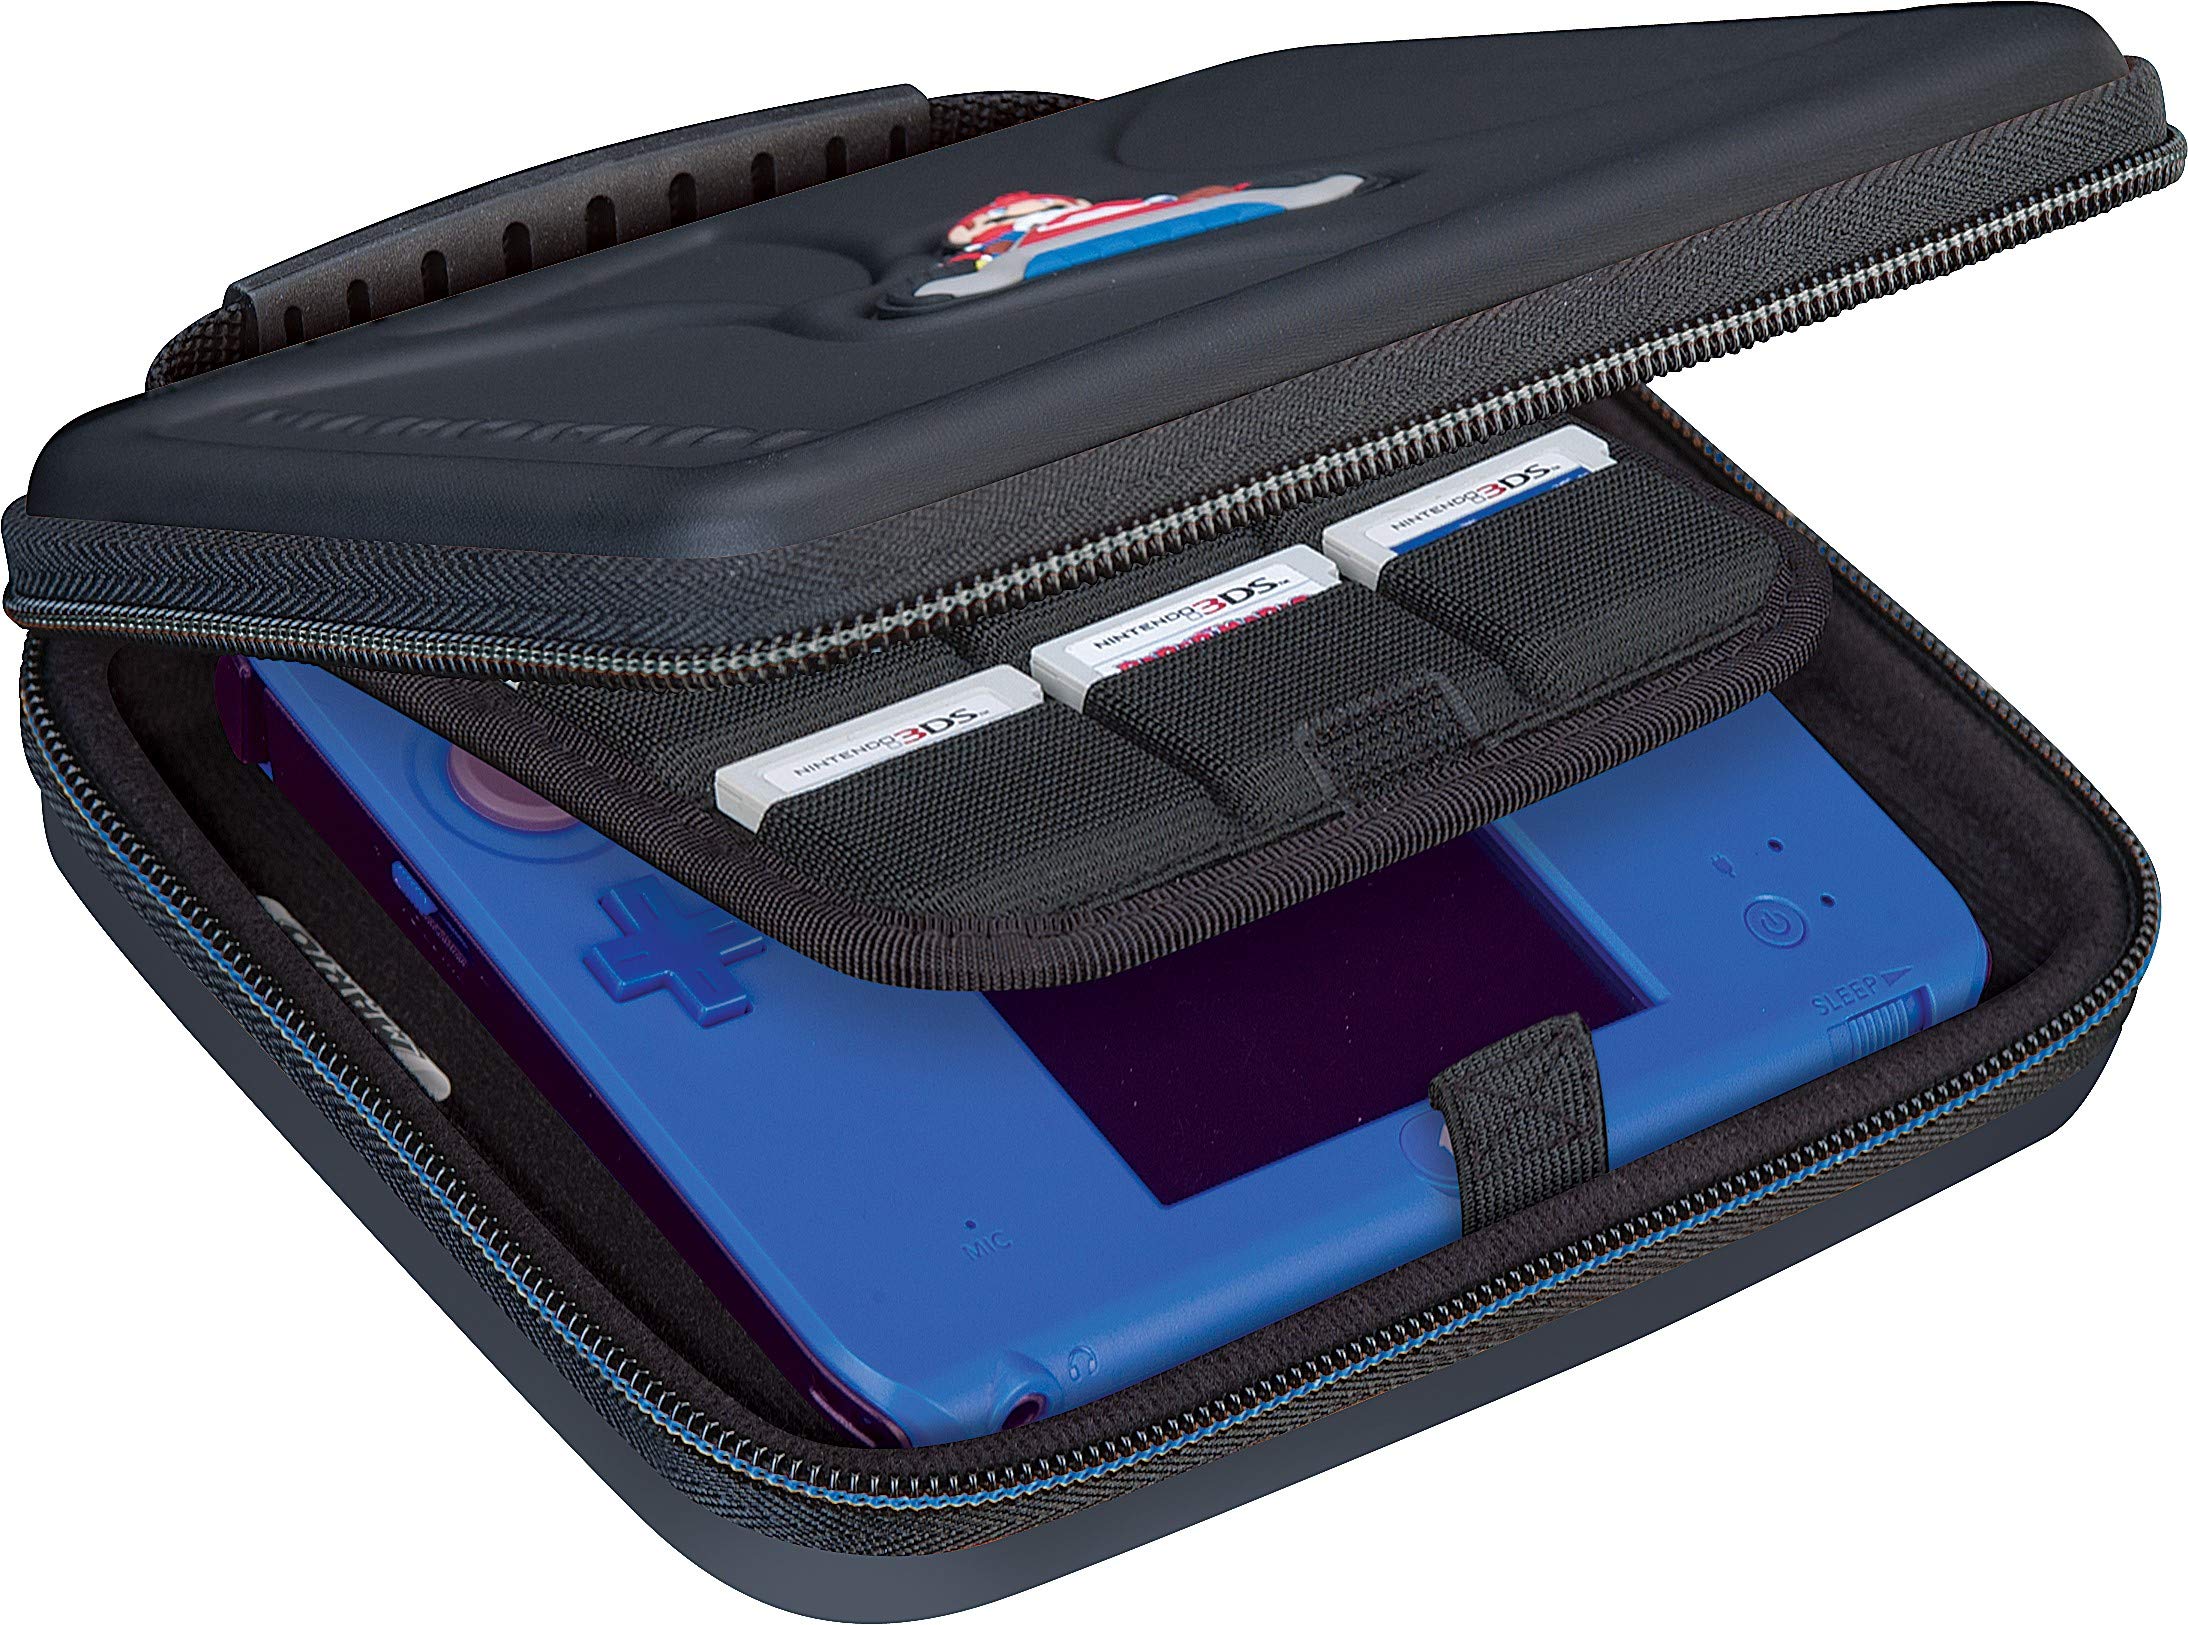 Game Traveler Nintendo 3DS or 2DS Case - Compatible with Nintendo 3DS, 3DS XL, 2DS, 2DS XL, New 3DS, 3DSi, 3DSi XL - Includes Game Card Pouch - Licensed by Nintendo